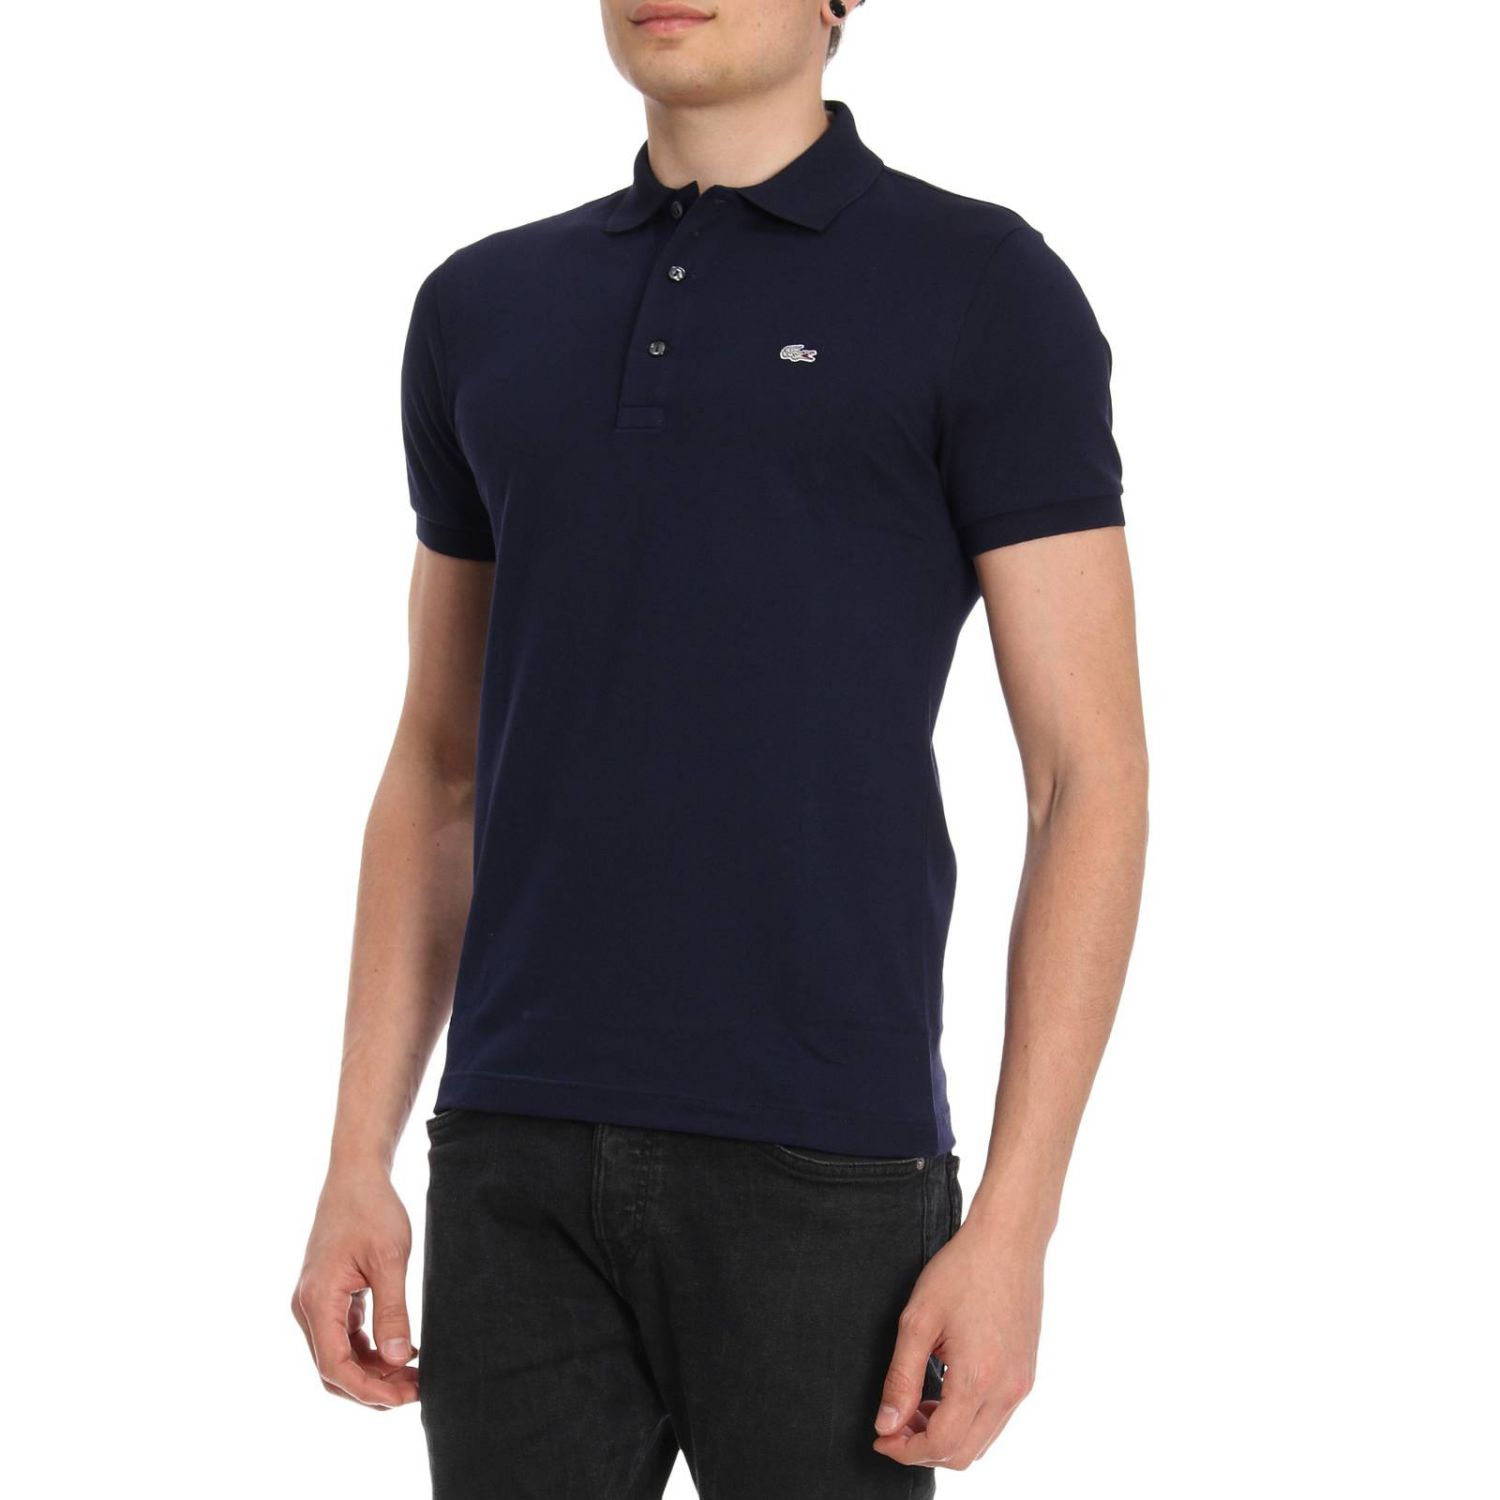 Lacoste Outlet: T-shirt men - Navy | T-Shirt Lacoste PH4014 GIGLIO.COM